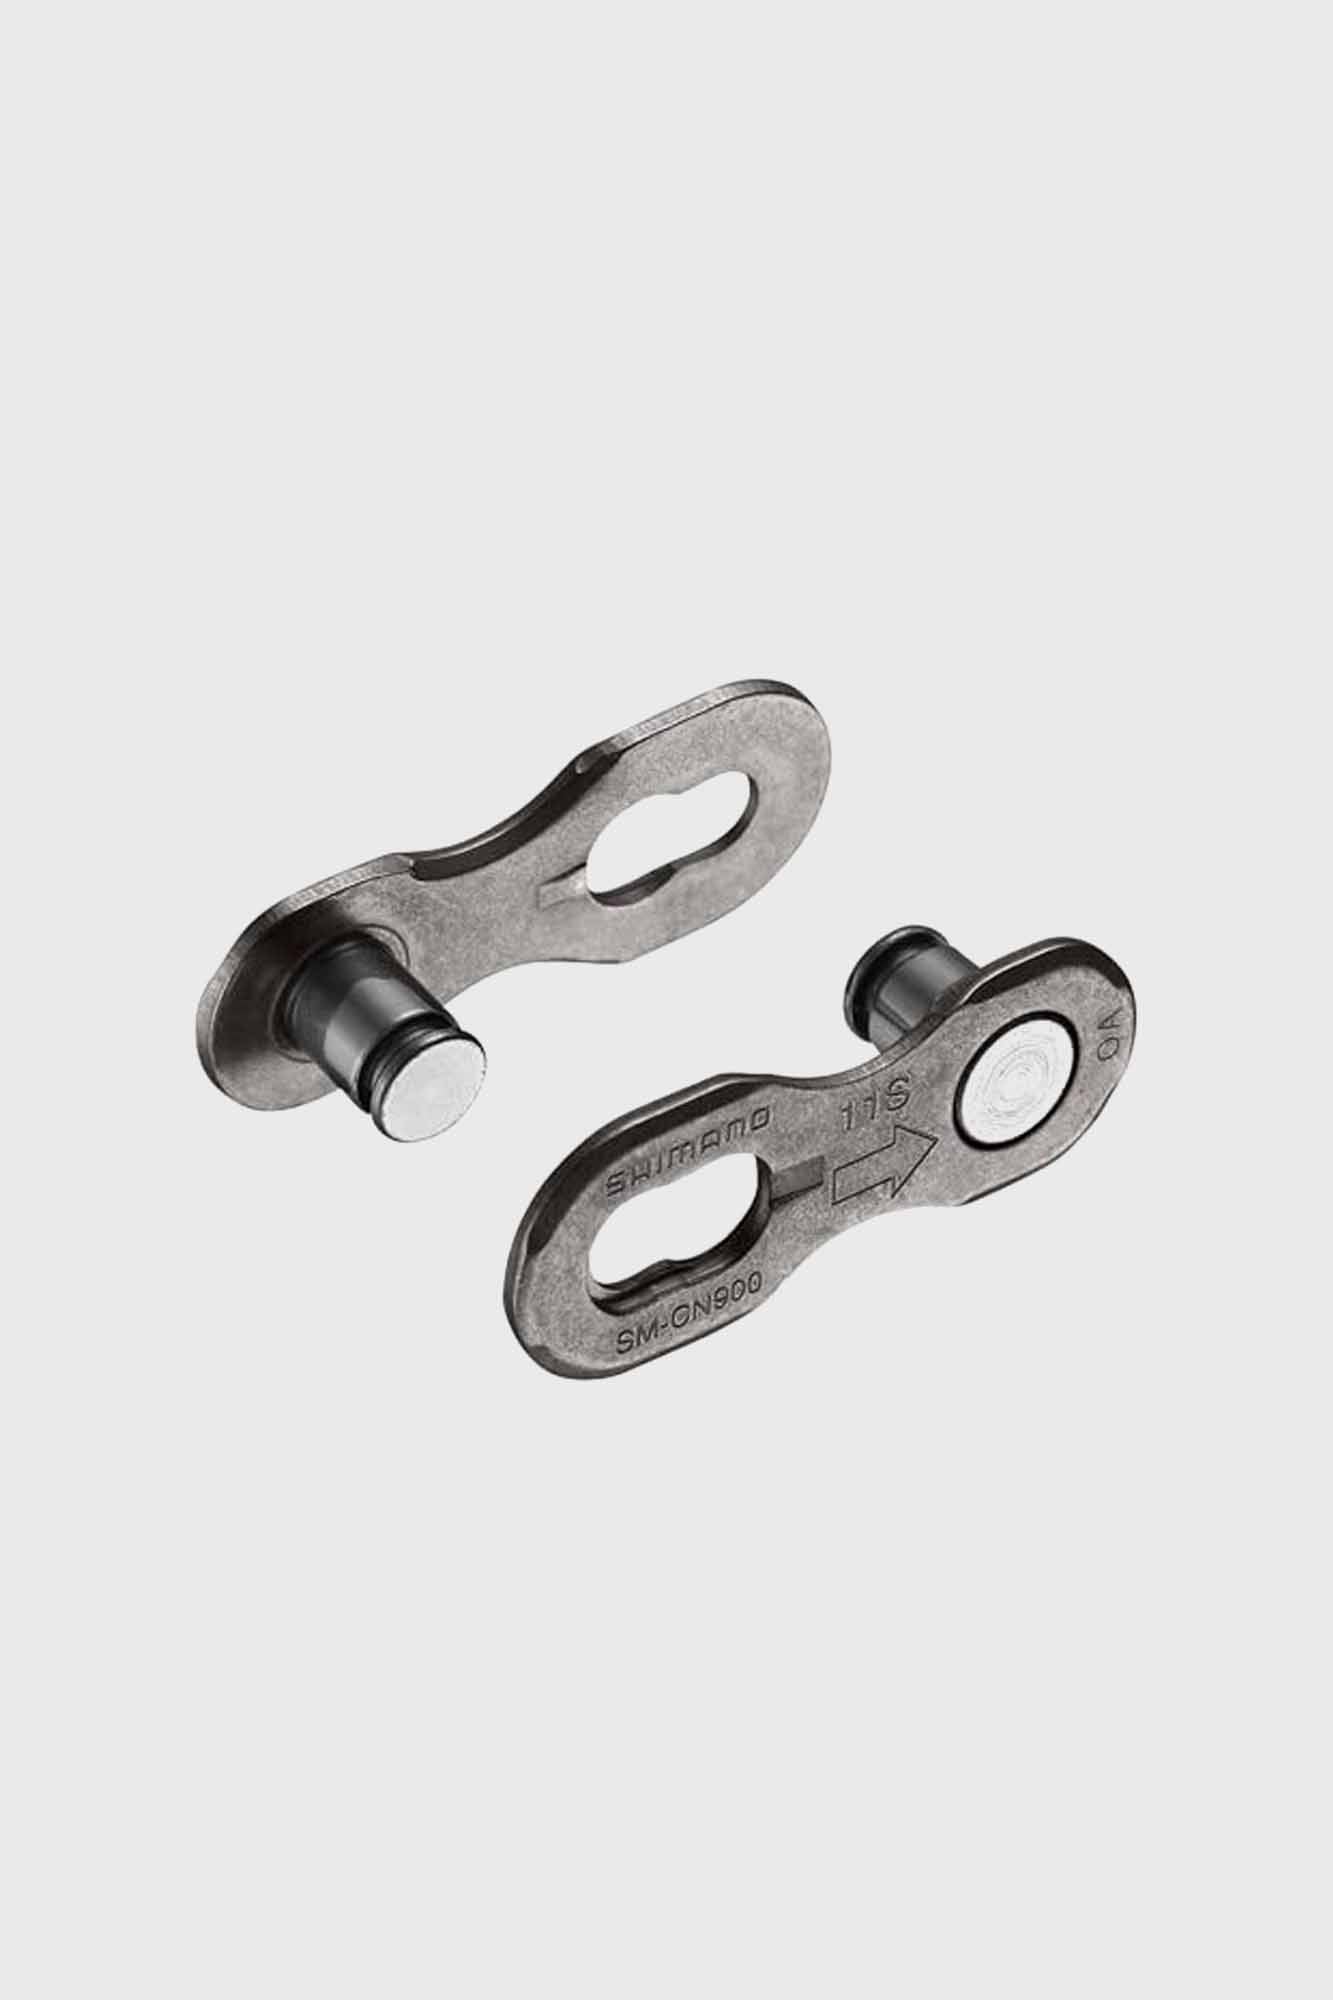 Shimano SM-CN900 Quick link for Shimano 11spd Chains Silver